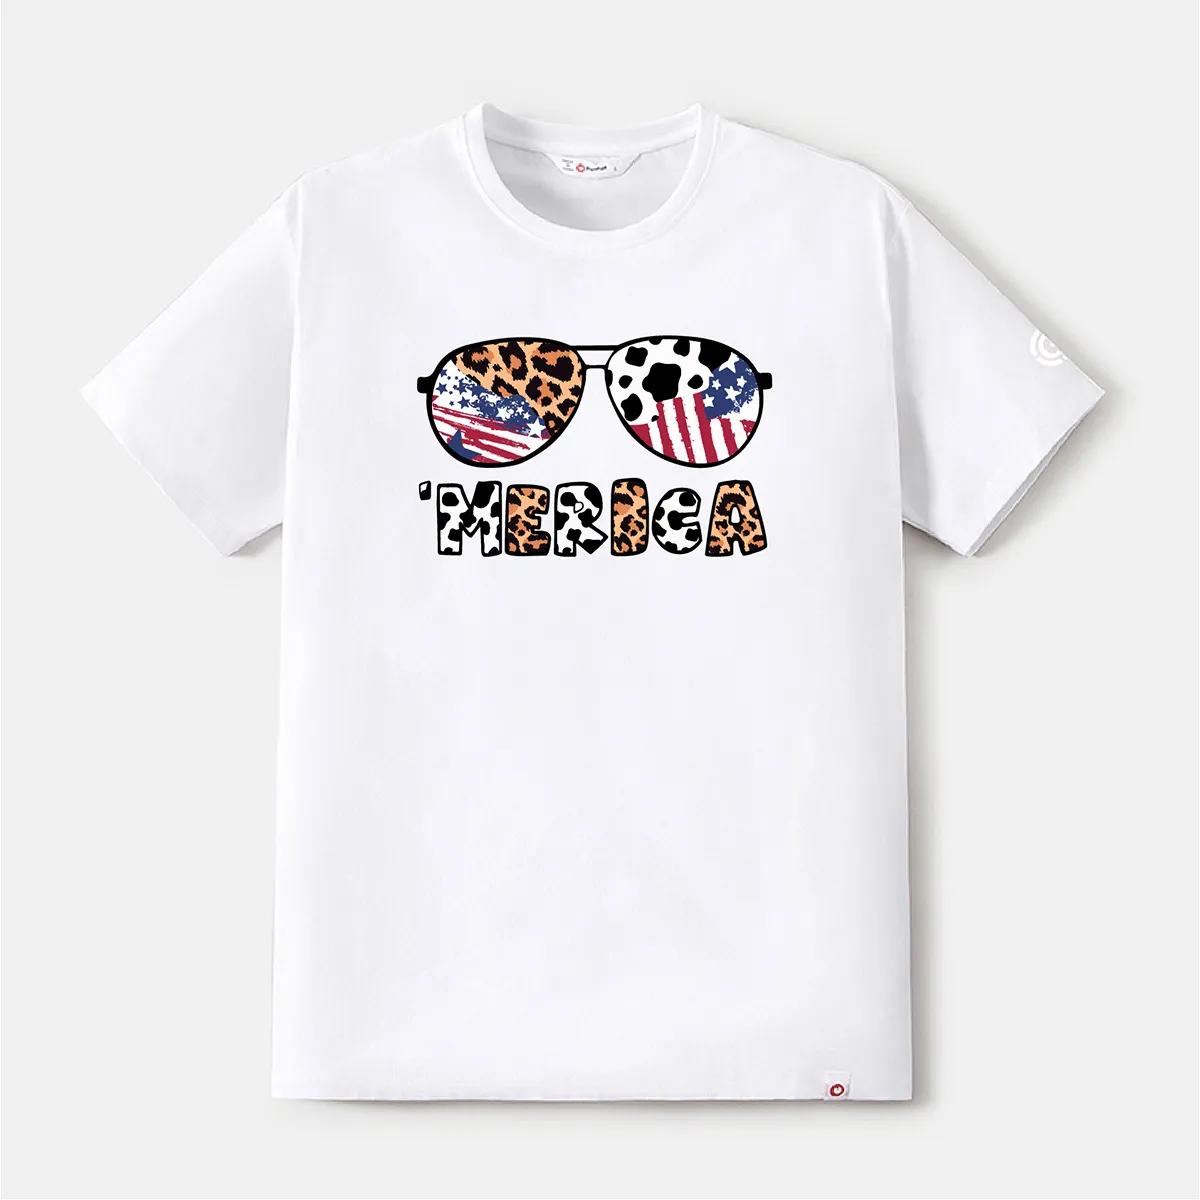 Go-Neat Water Repellent and Stain Resistant Family Matching Independence Day Glasses & Letter Print Short-sleeve Tee White big image 1